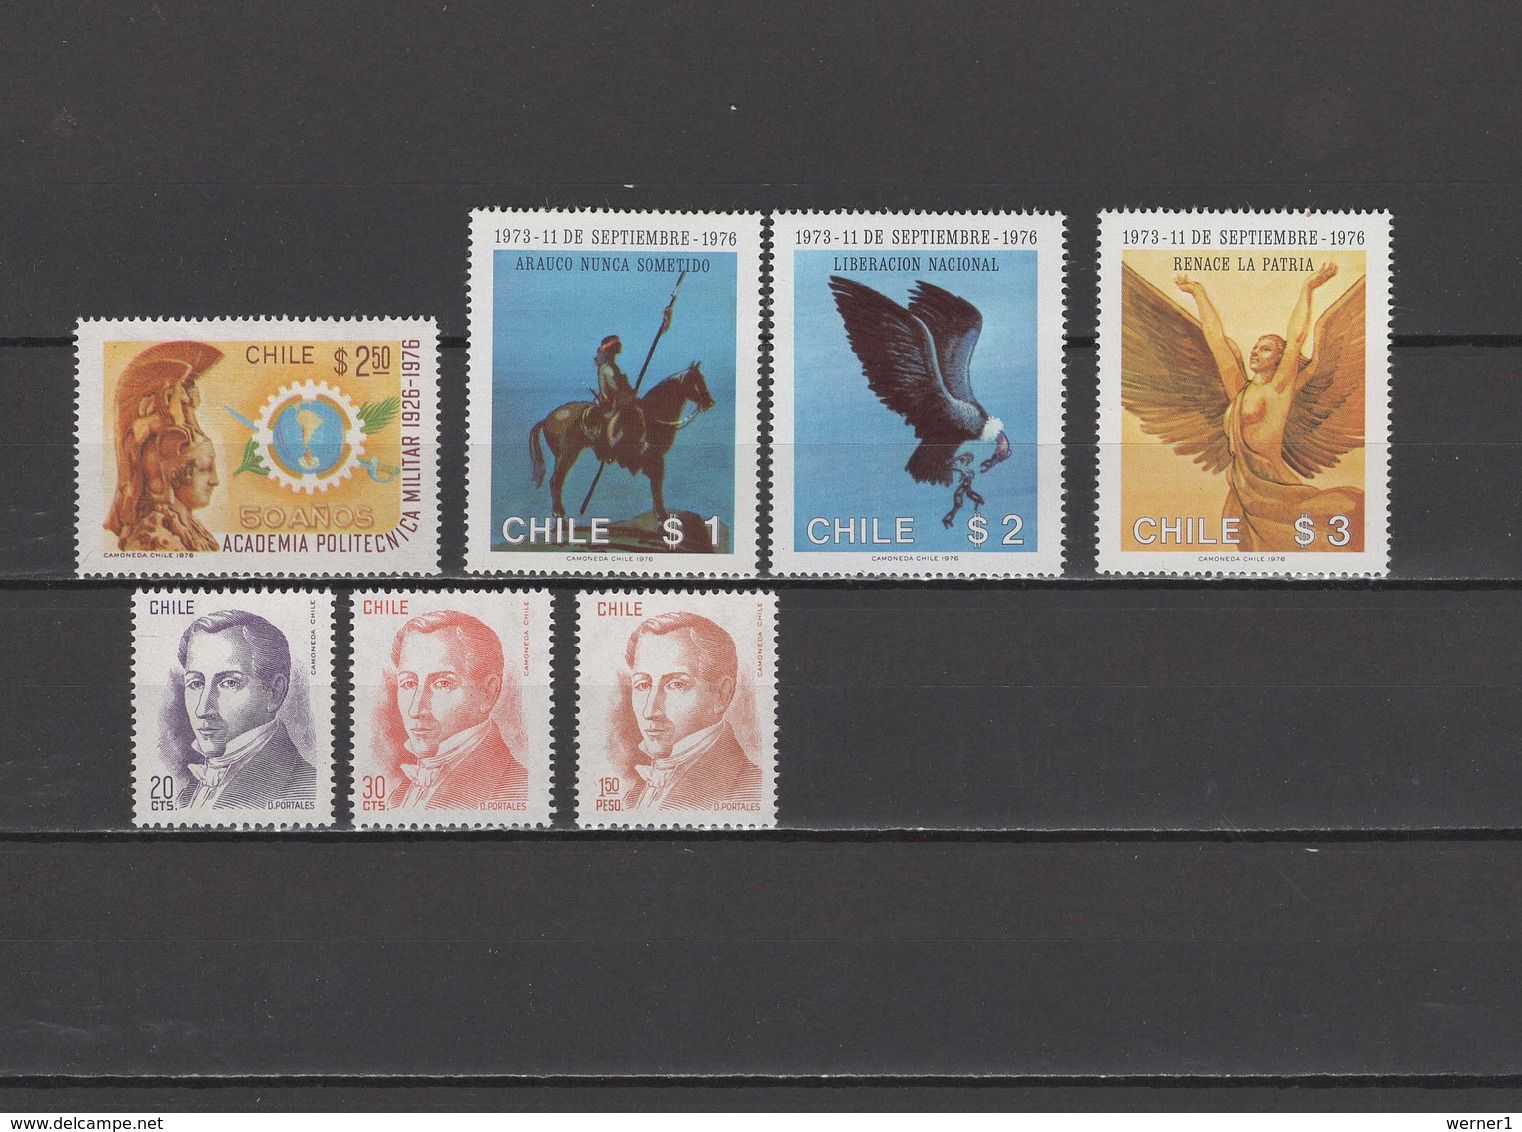 Chile 1976 Michel 858-864 Polytechnic Military Academy, Military Governement, Diego Portales 7 Stamps MNH - Chili